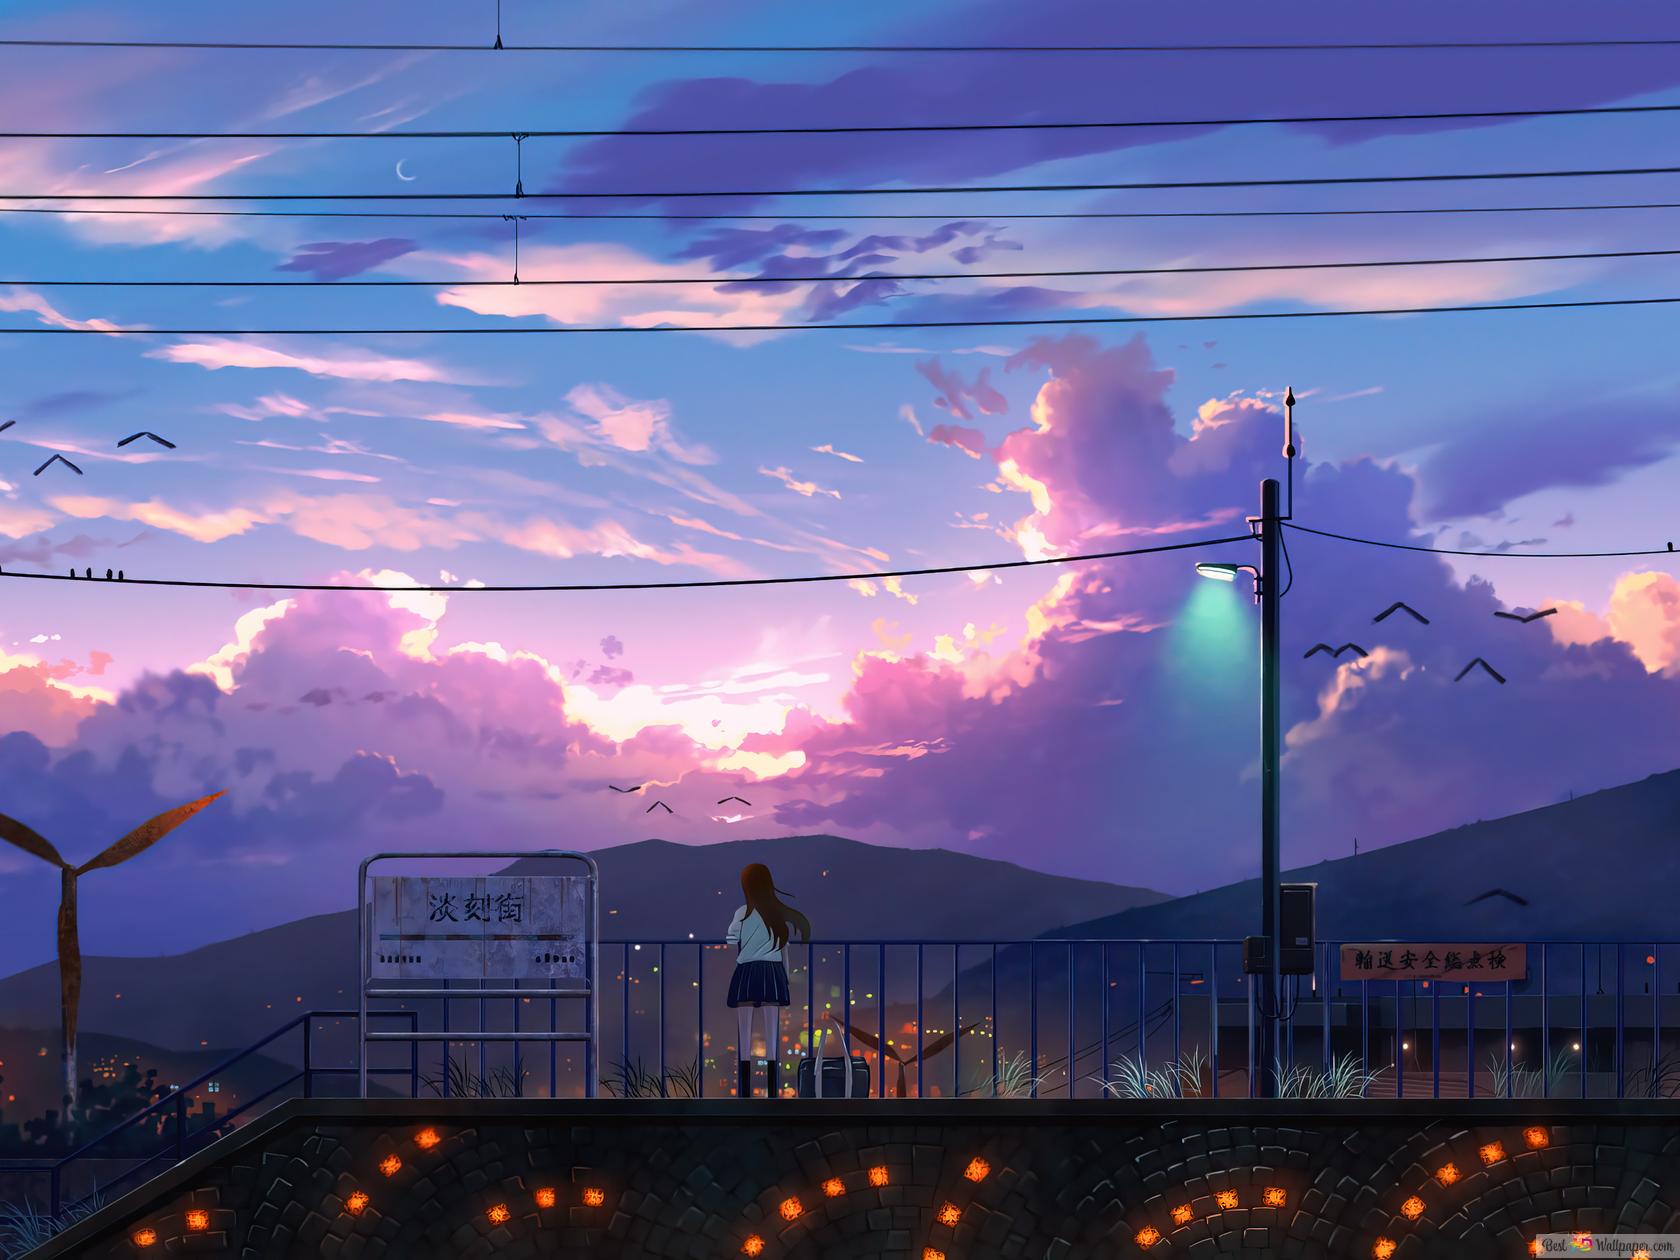 A painting of people standing on the edge - Sunrise, anime landscape